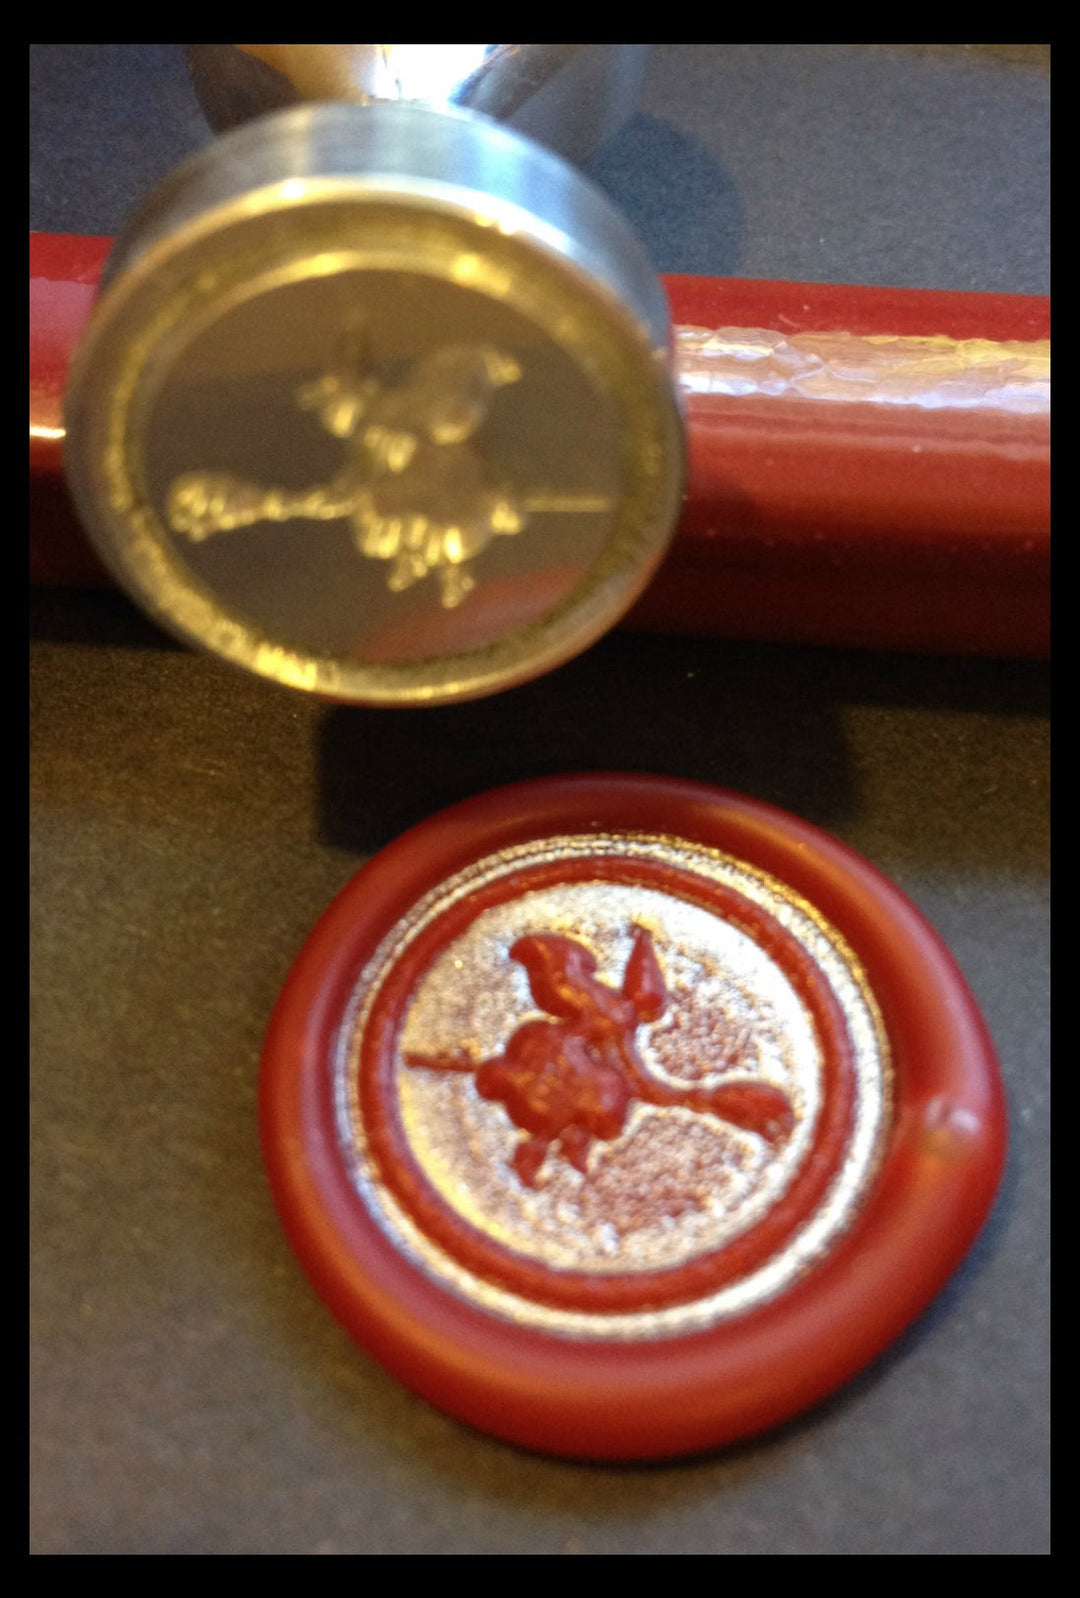 Halloween Design Wax Seal Stamps- Made in USA- LetterSeals.com